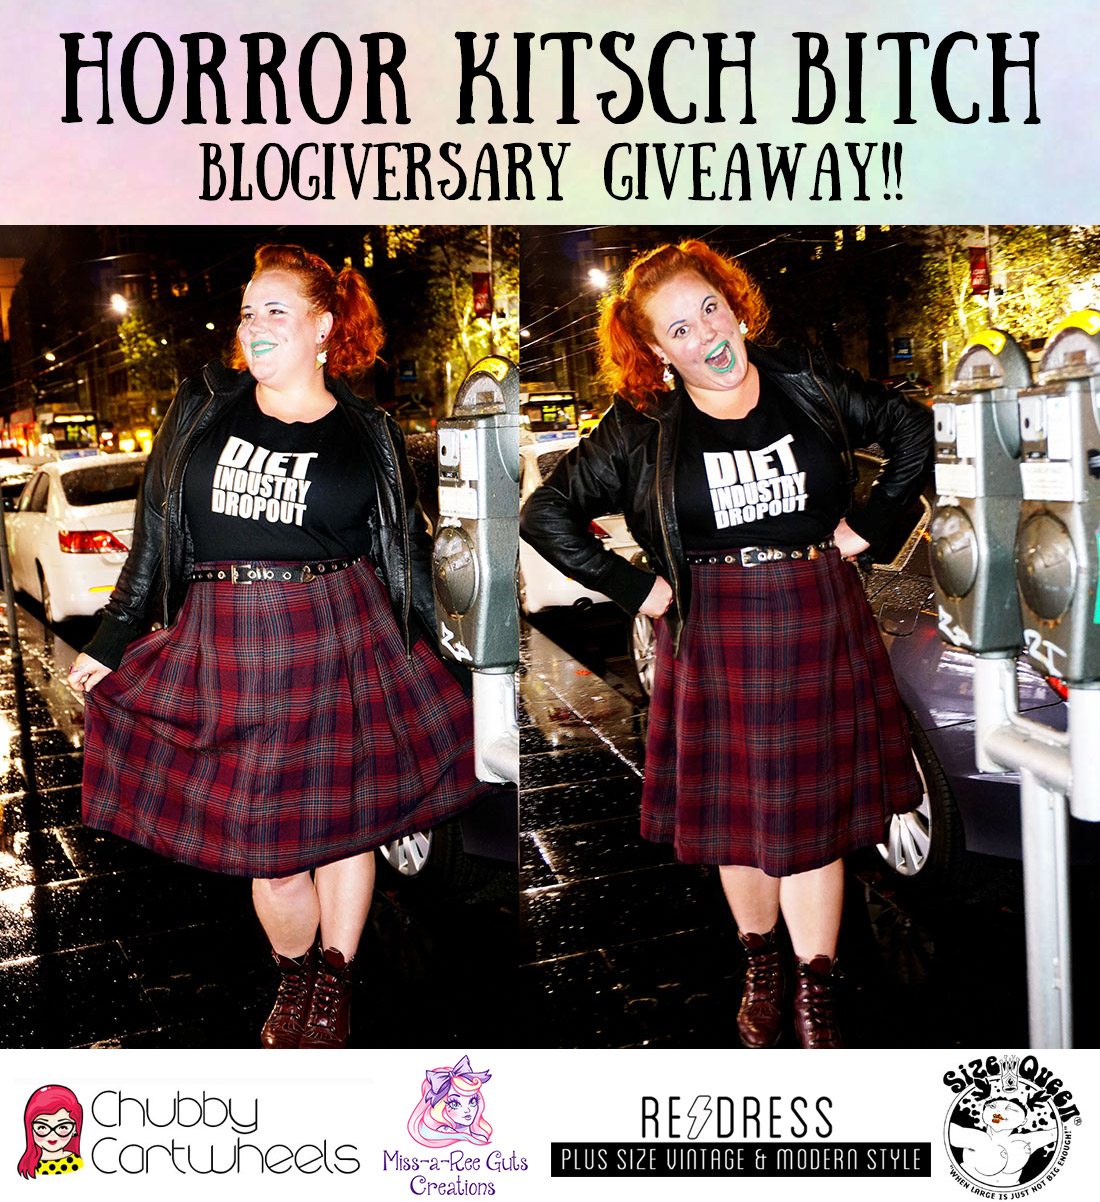 Horror Kitsch Bitch Blogiversary Giveaway Competition